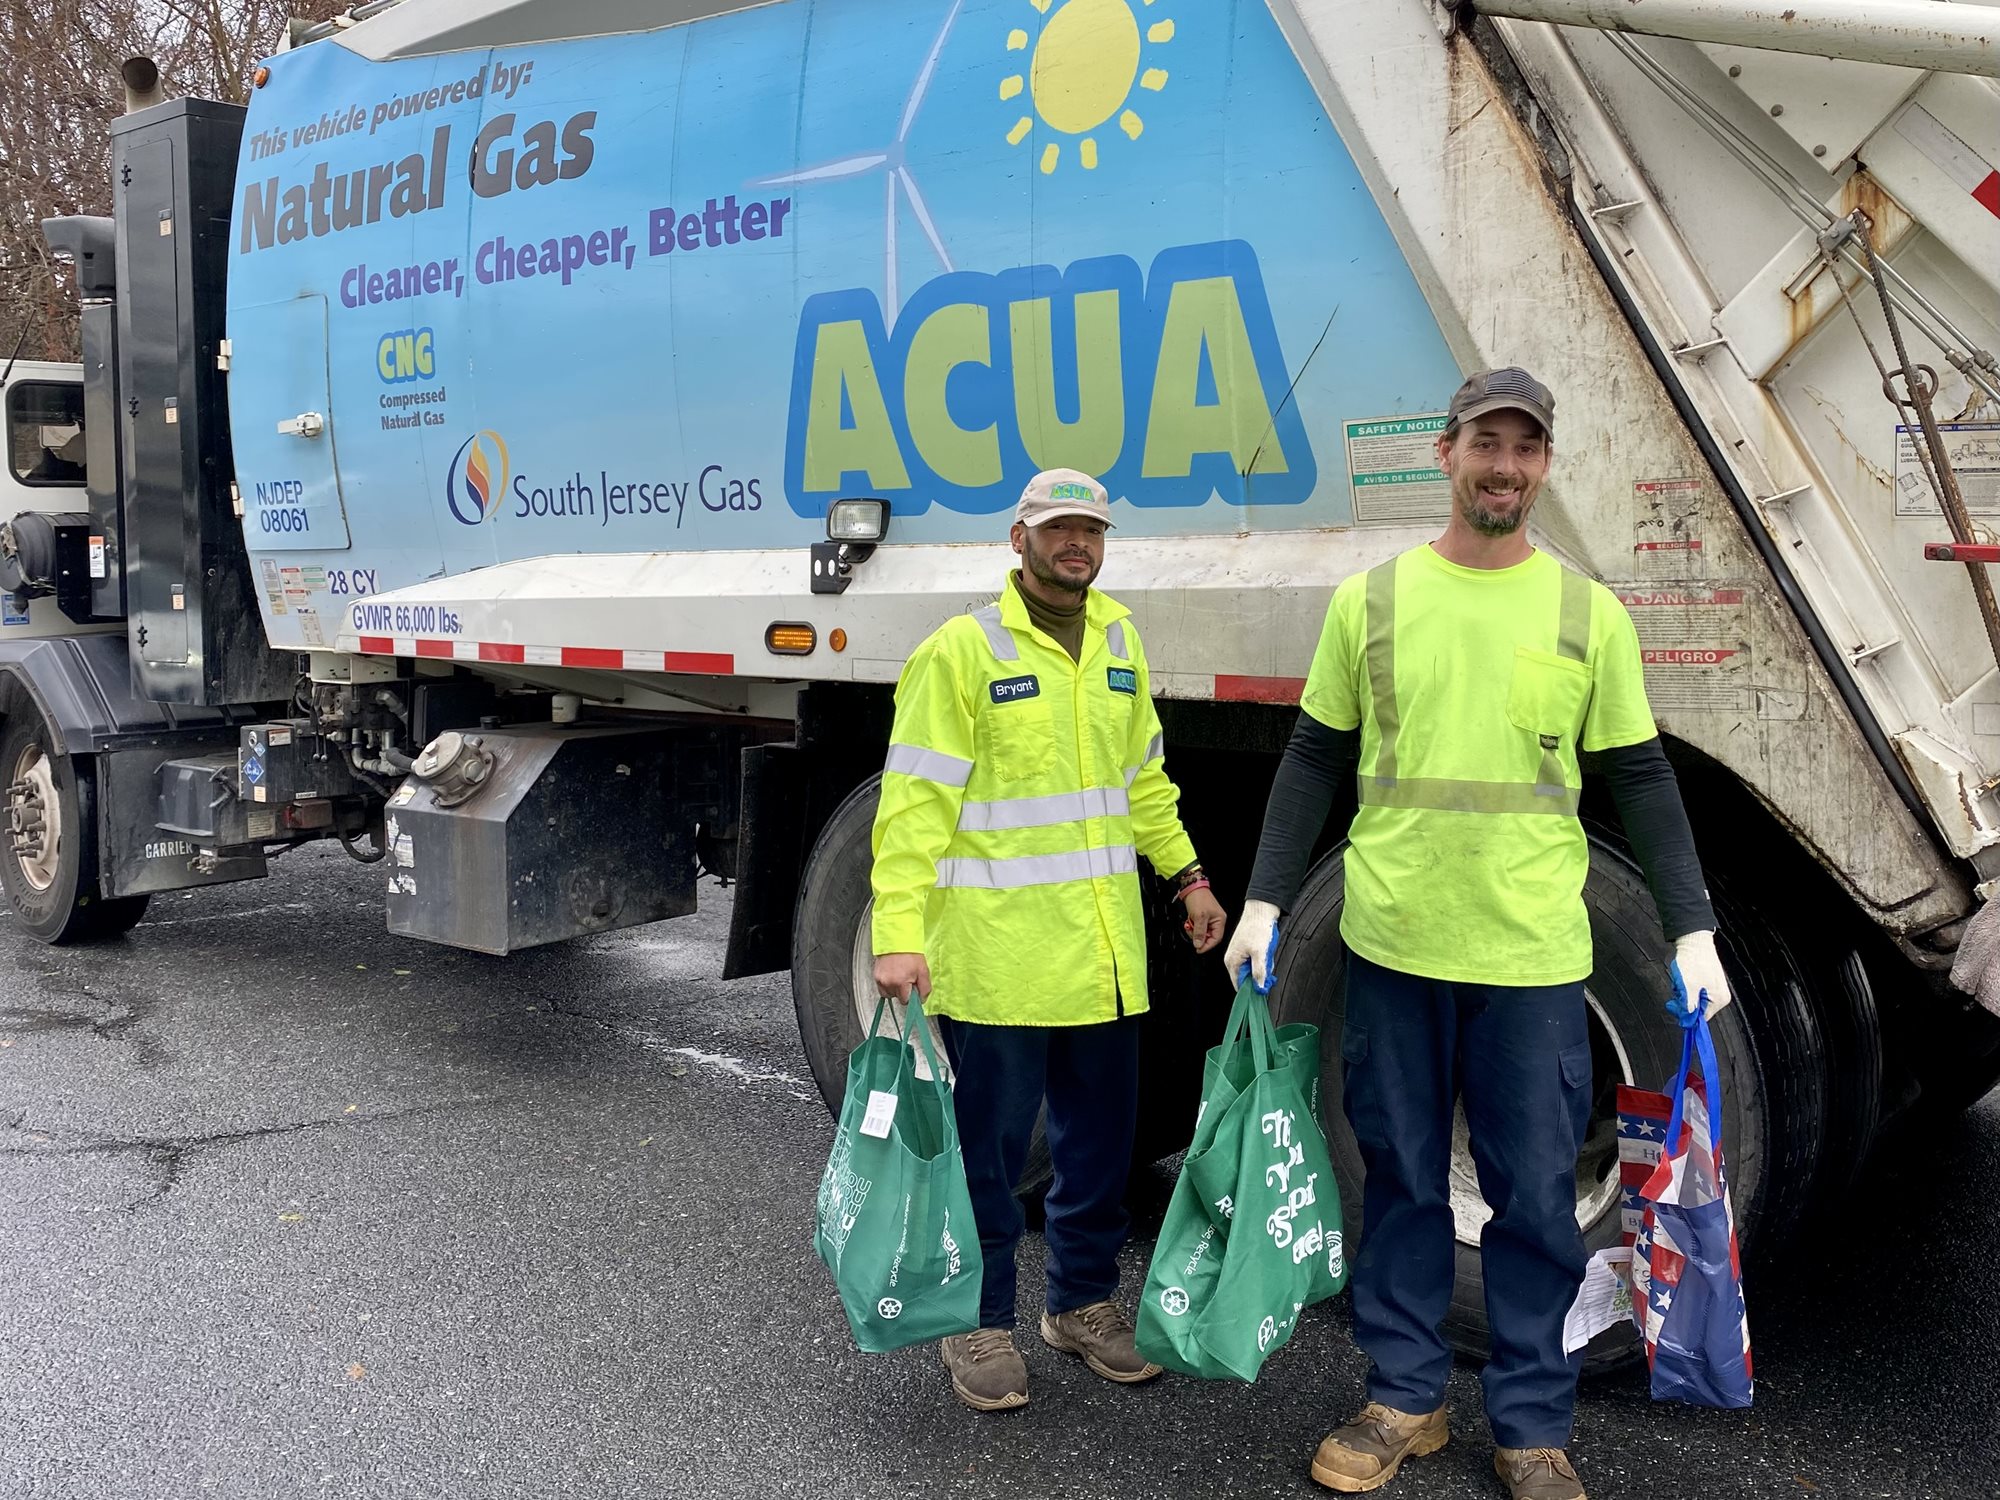 ACUA Recycling Team Collects 17,913 lbs. of Food Donations During Annual Food Drive for Community FoodBank of New Jersey